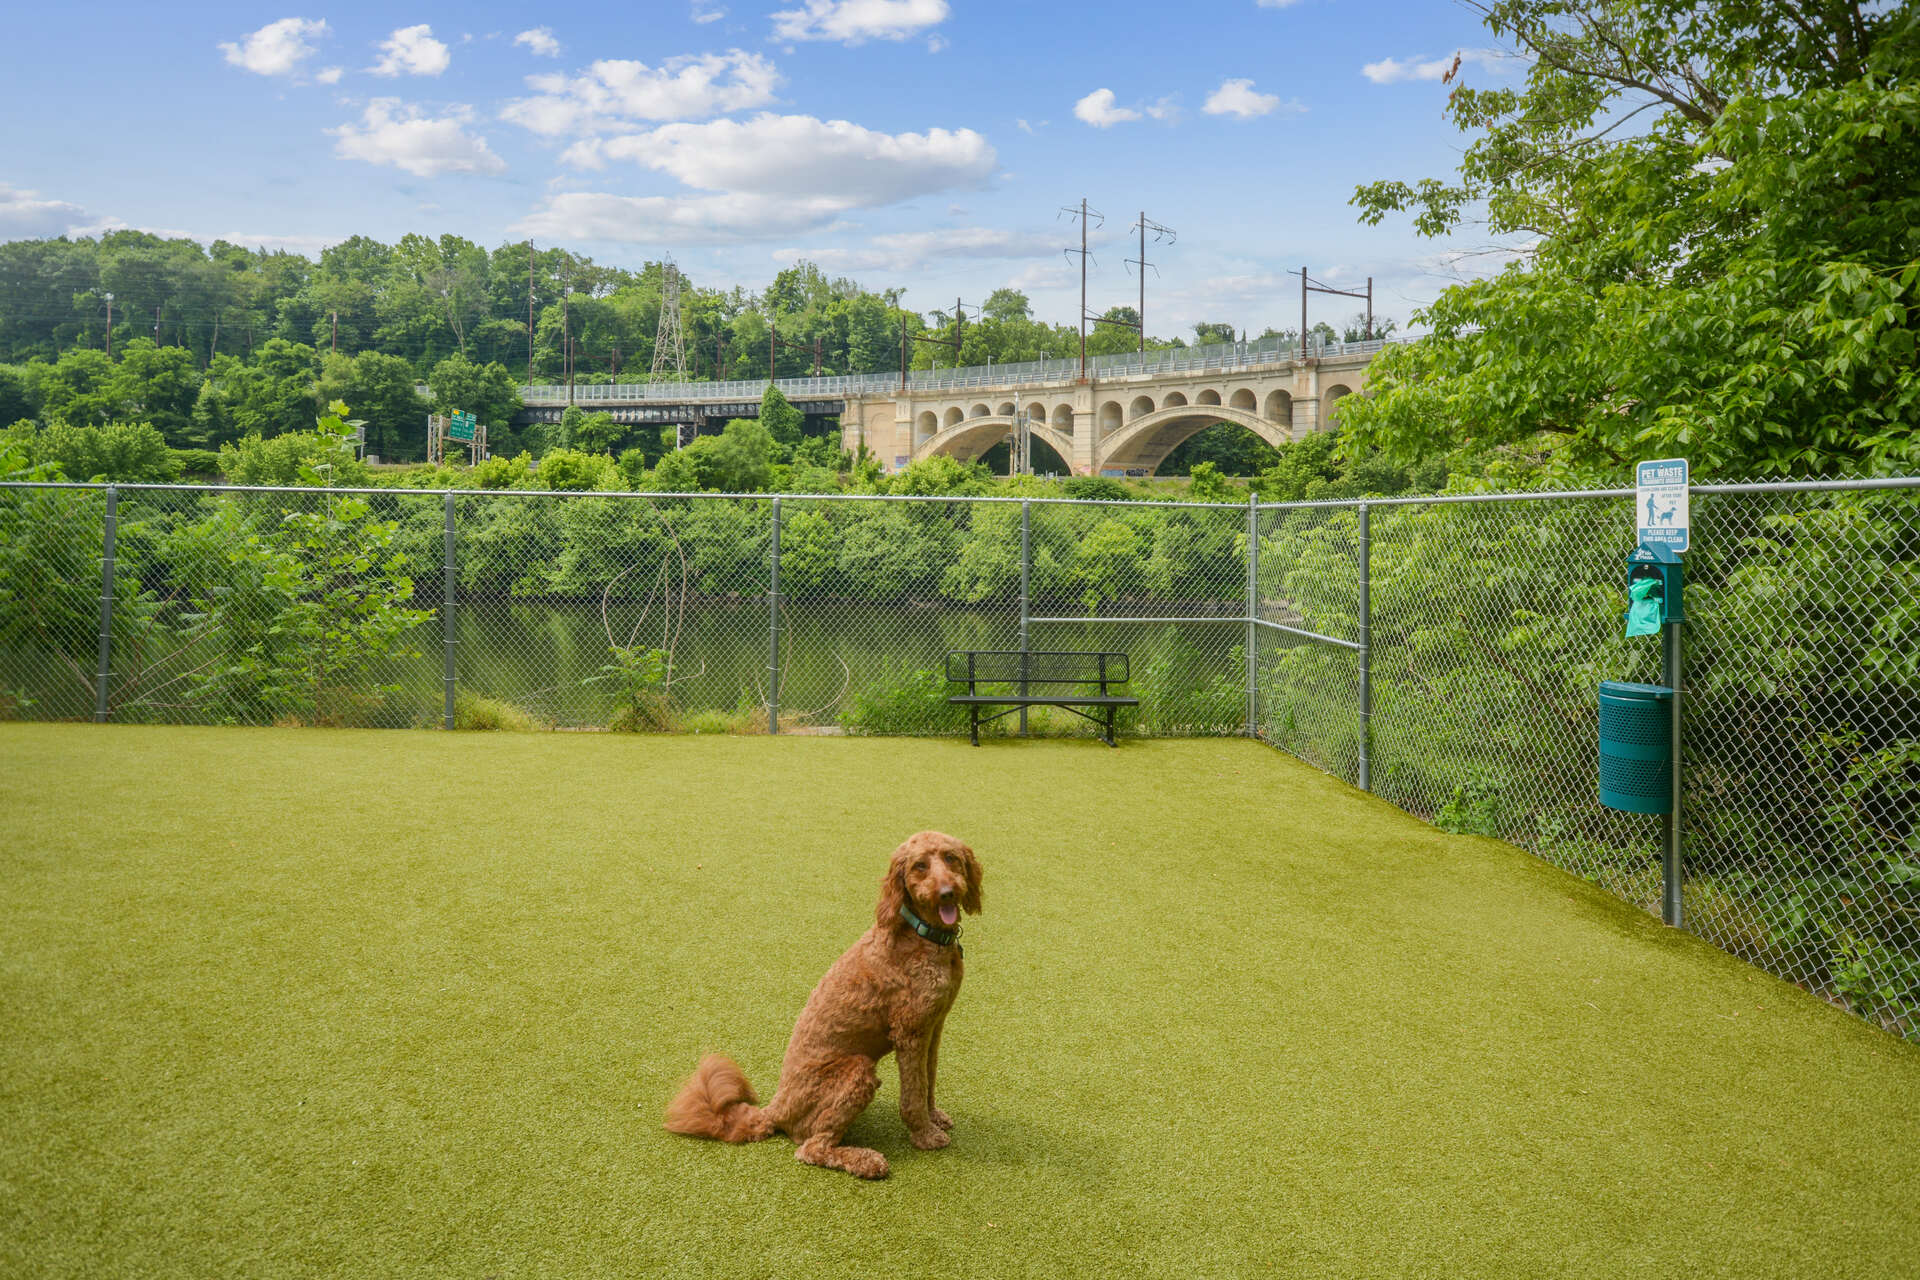 Dog sitting in riverside dog park with view of bridge